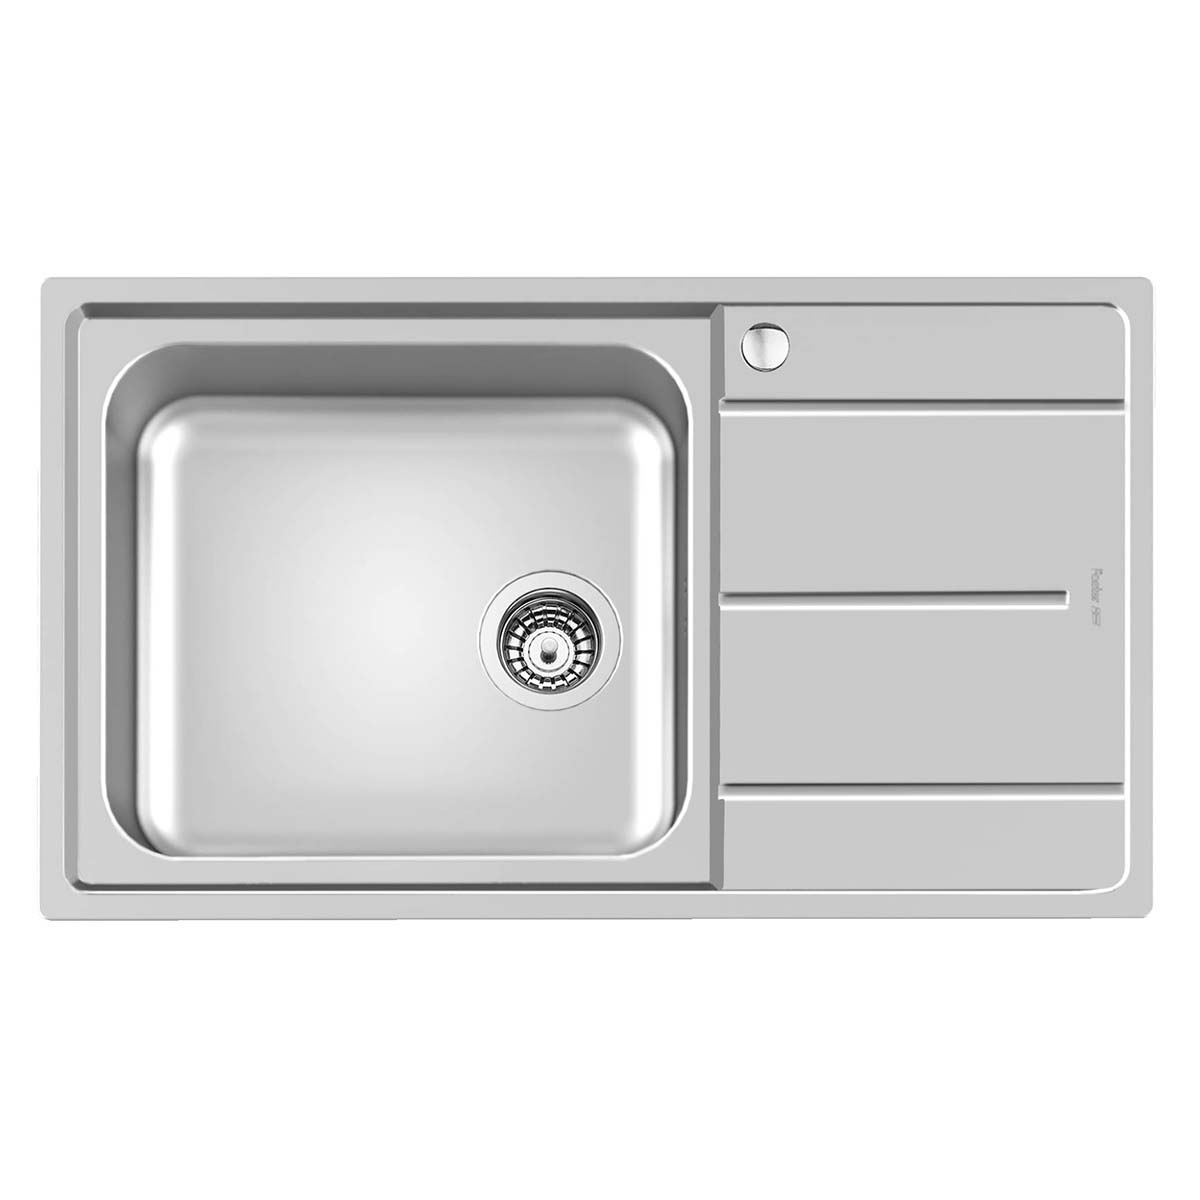 Foster Evo Kitchen Sink with Draining Board Left Handed 860x500mm Brushed Stainless Steel